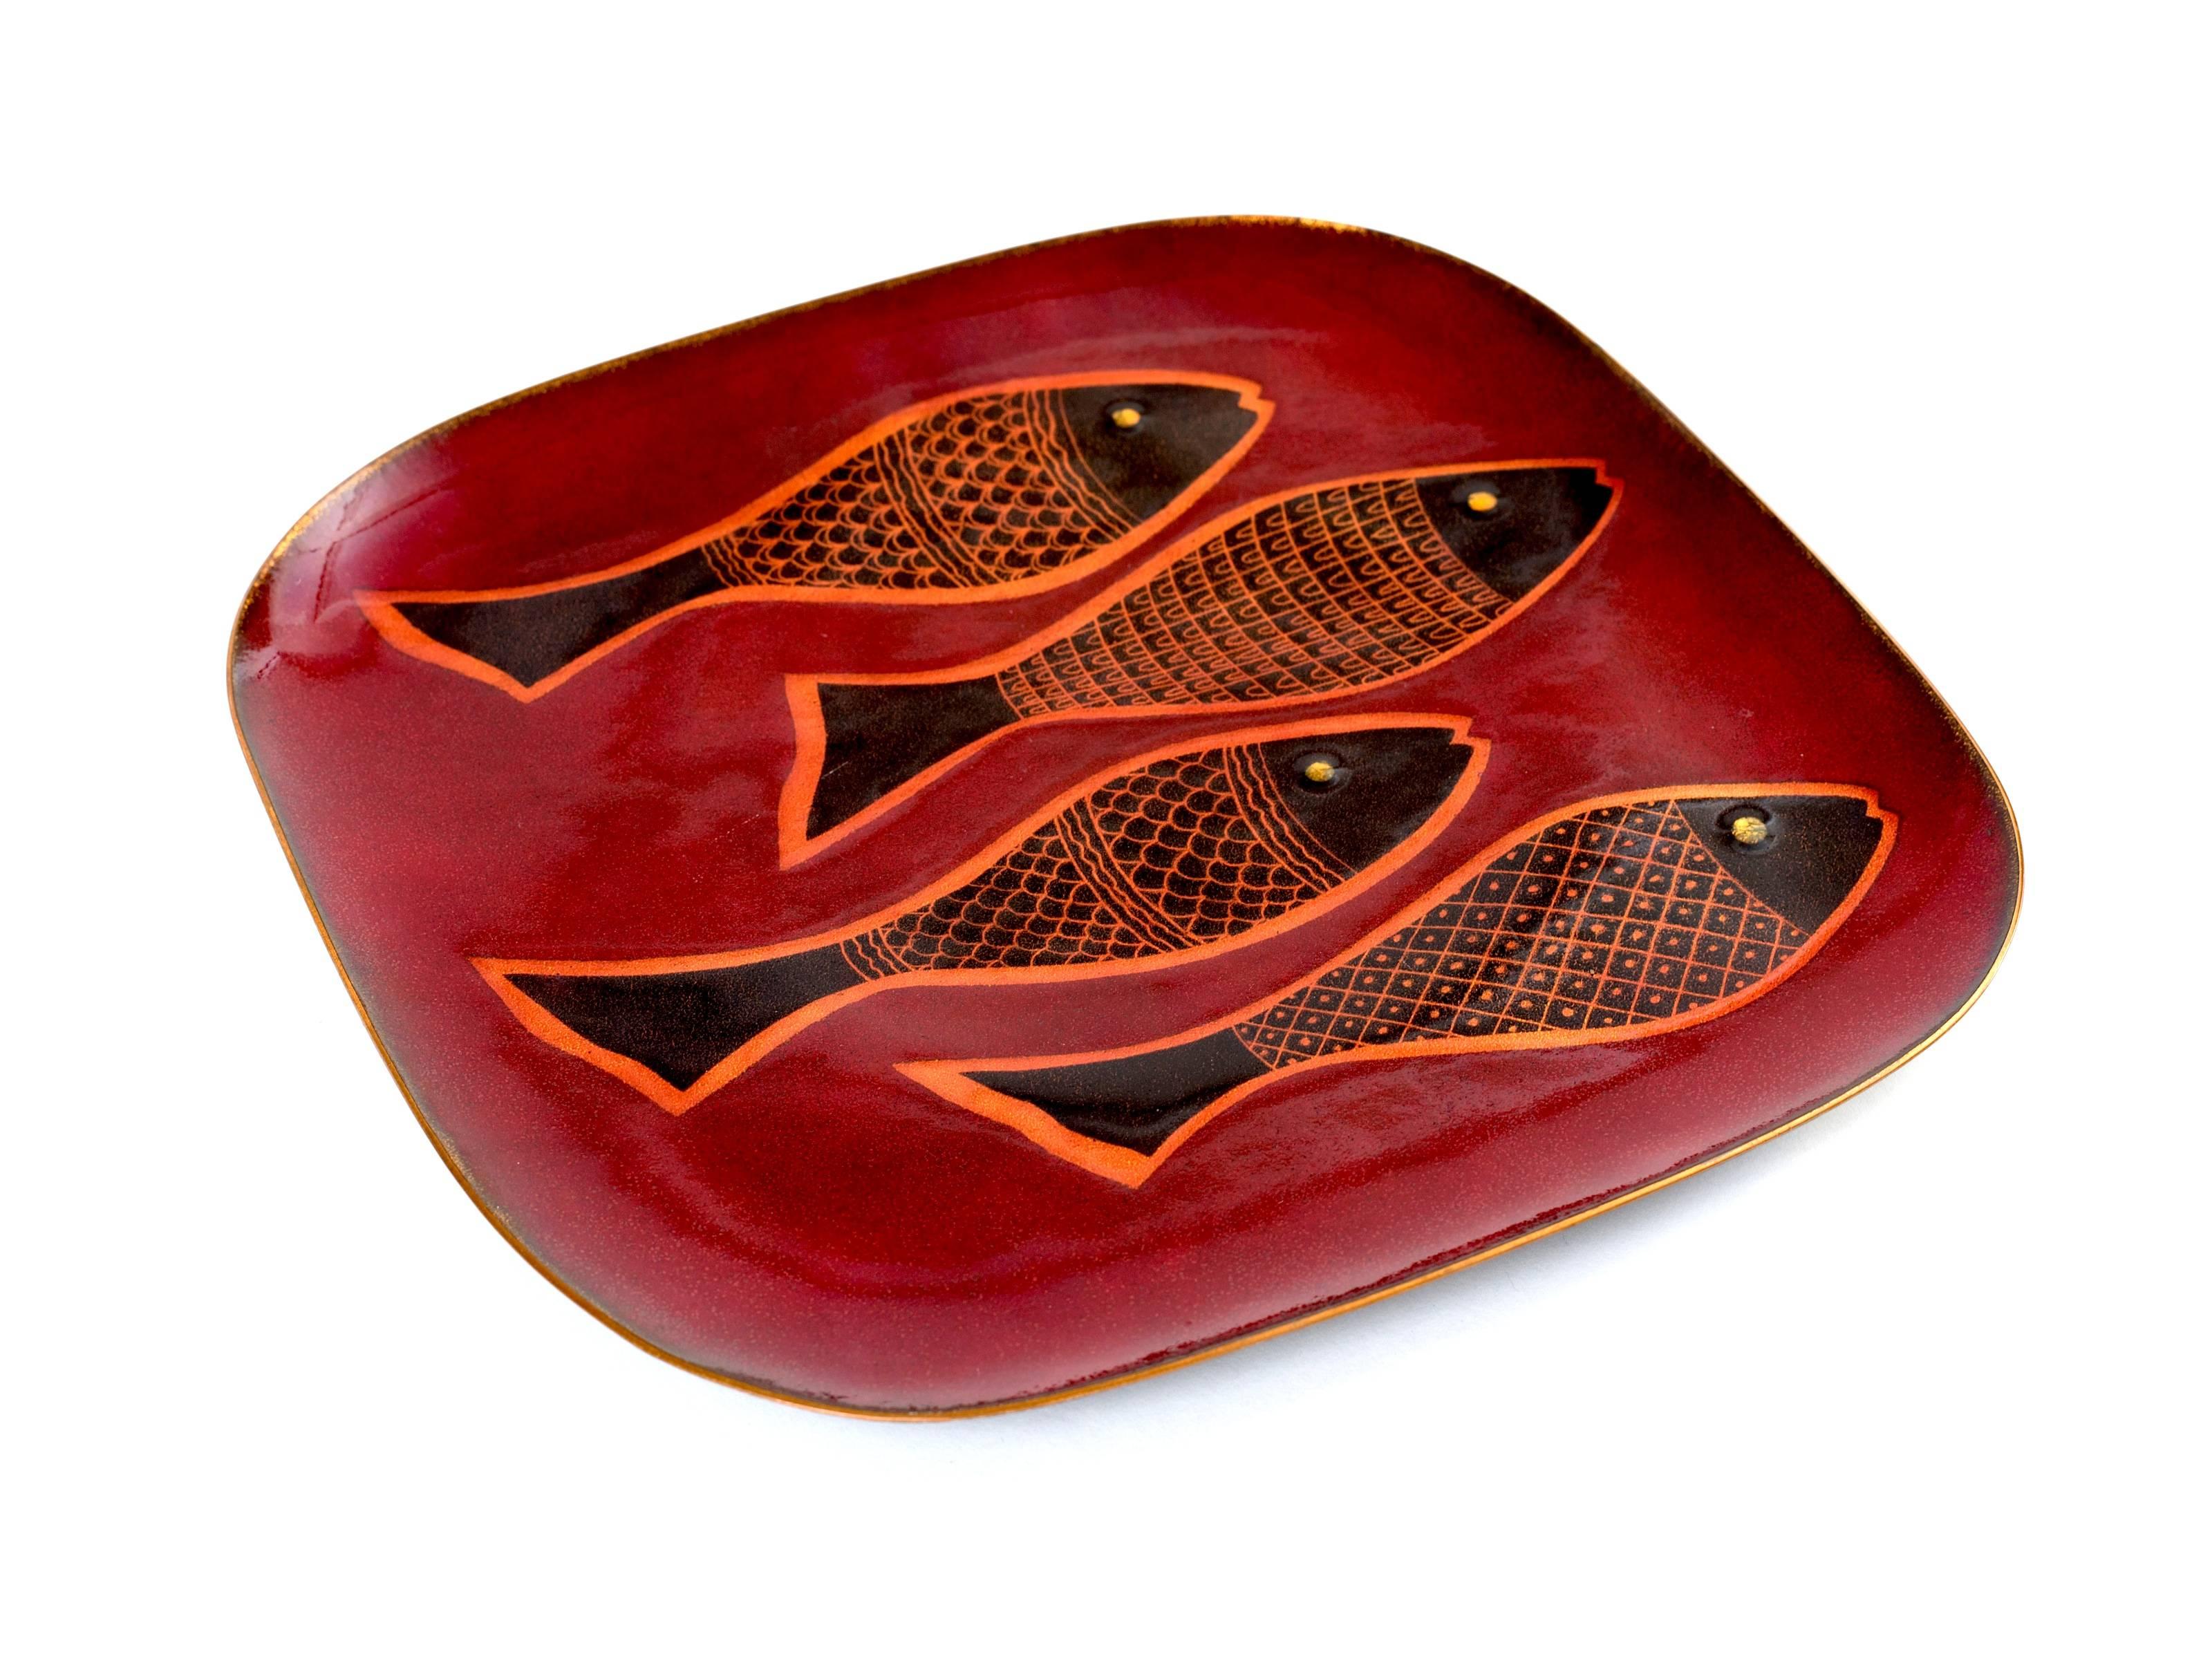 A striking and fabulous piece of Mid-Century Mexican Folk Art by Miguel Pineda in beautiful vintage condition. Four fishes on a background of vibrant colors of maroon, orange and black edged in gold. Miguel Pineda is internationally known for his